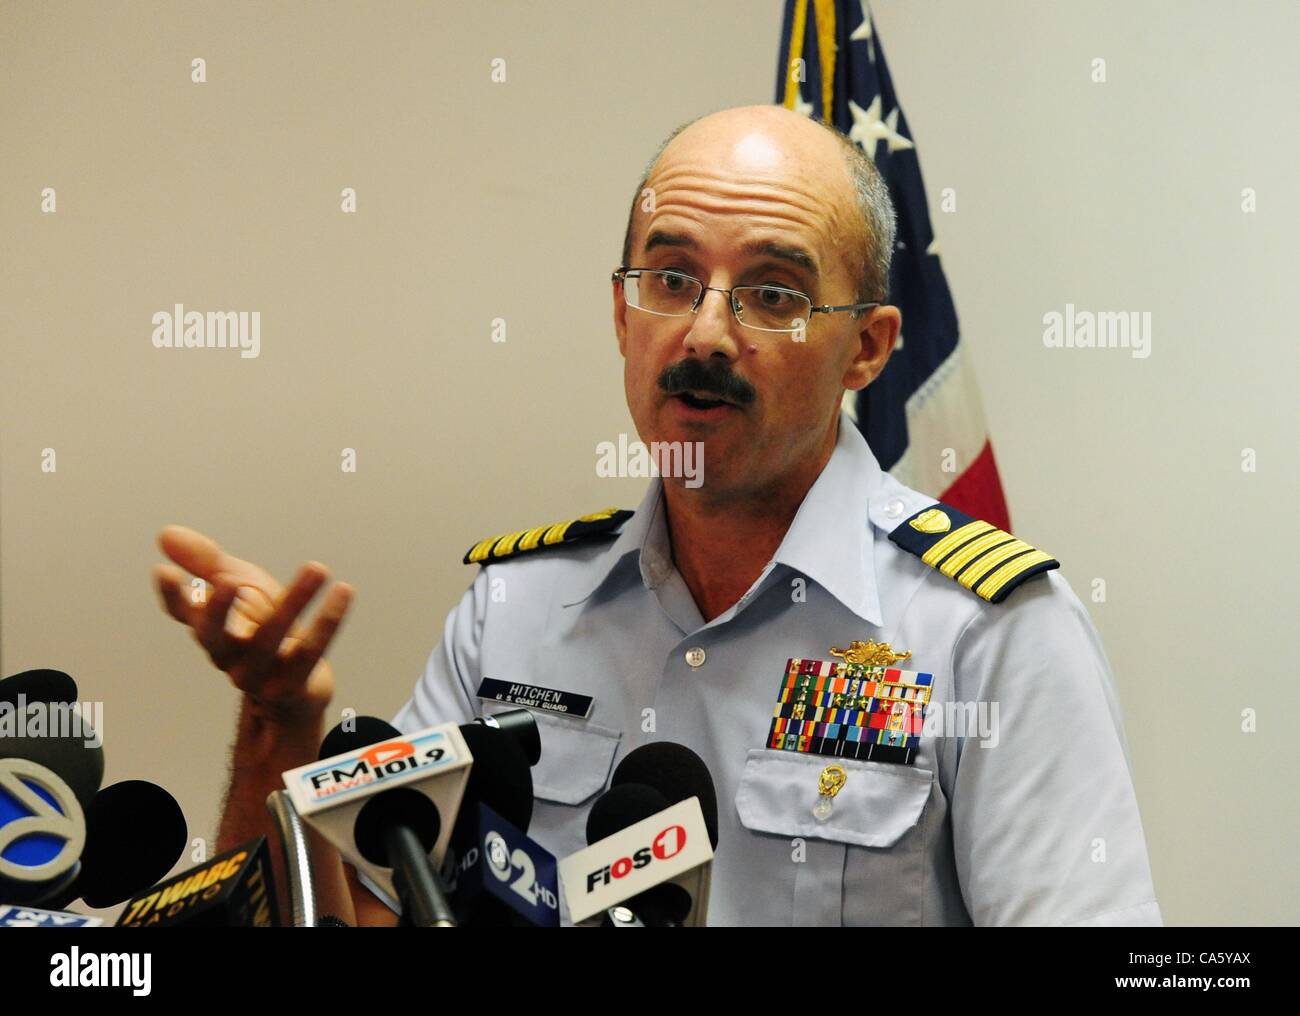 June 12, 2012 - Manhattan, New York, U.S. - Captain GREGORY HITCHEN, Deputy Commander of Coast Guard Sector New York, discusses the false distress call to the Coast Guard Monday, reporting a vessel explosion and sinking east of Sandy Hook, N.J., during a press conference at Coast Guard Battery Park  Stock Photo